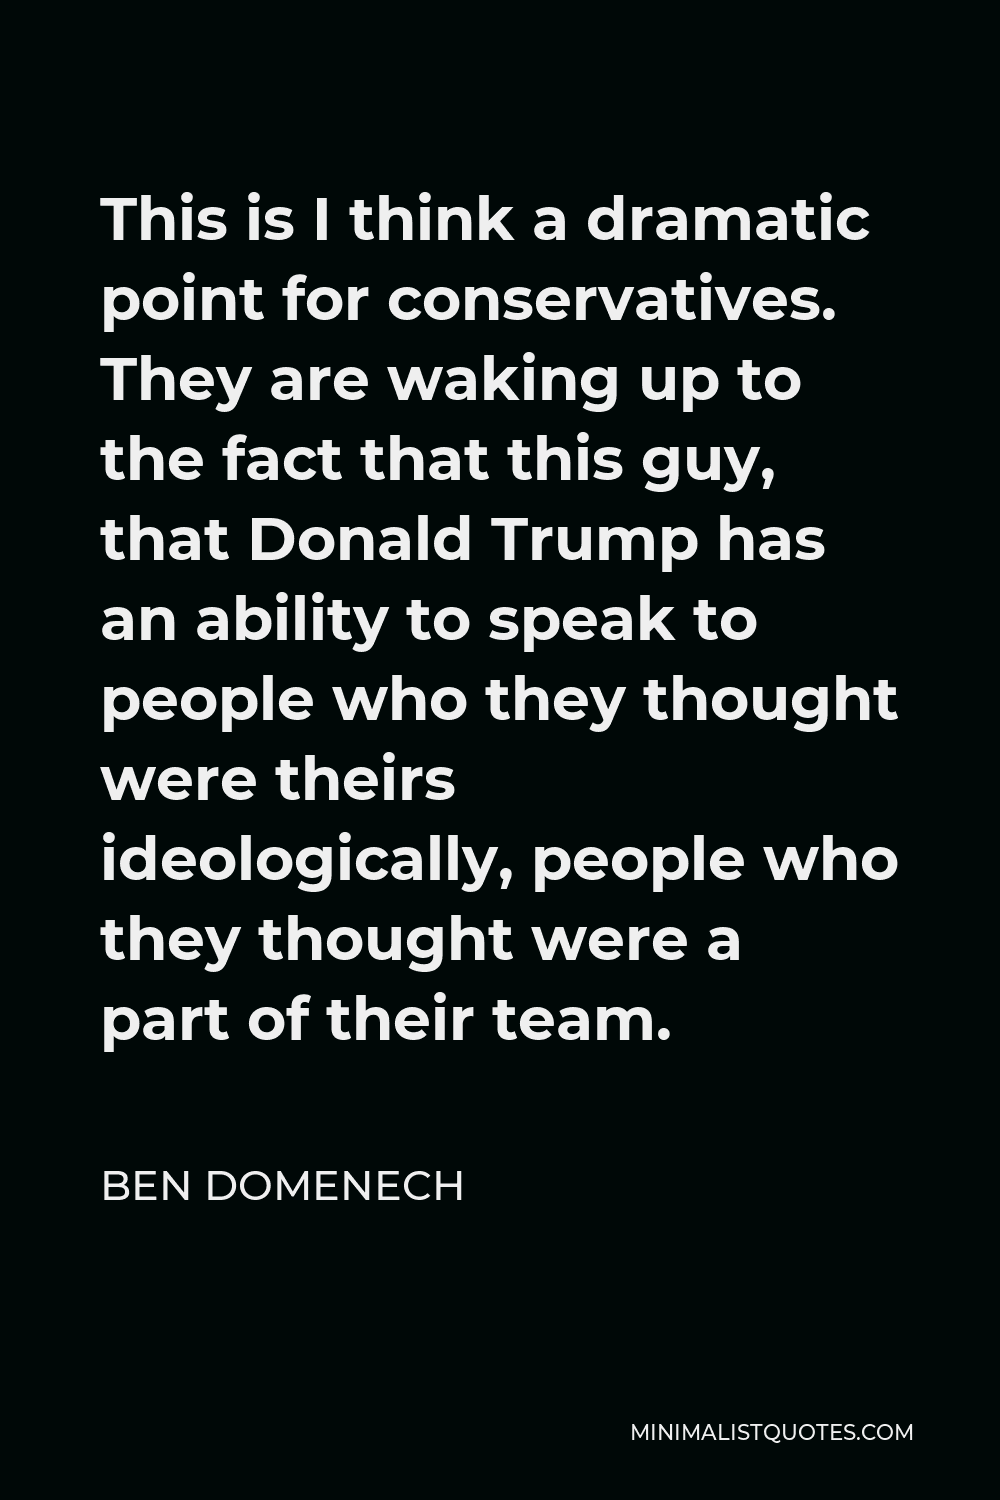 Ben Domenech Quote - This is I think a dramatic point for conservatives. They are waking up to the fact that this guy, that Donald Trump has an ability to speak to people who they thought were theirs ideologically, people who they thought were a part of their team.